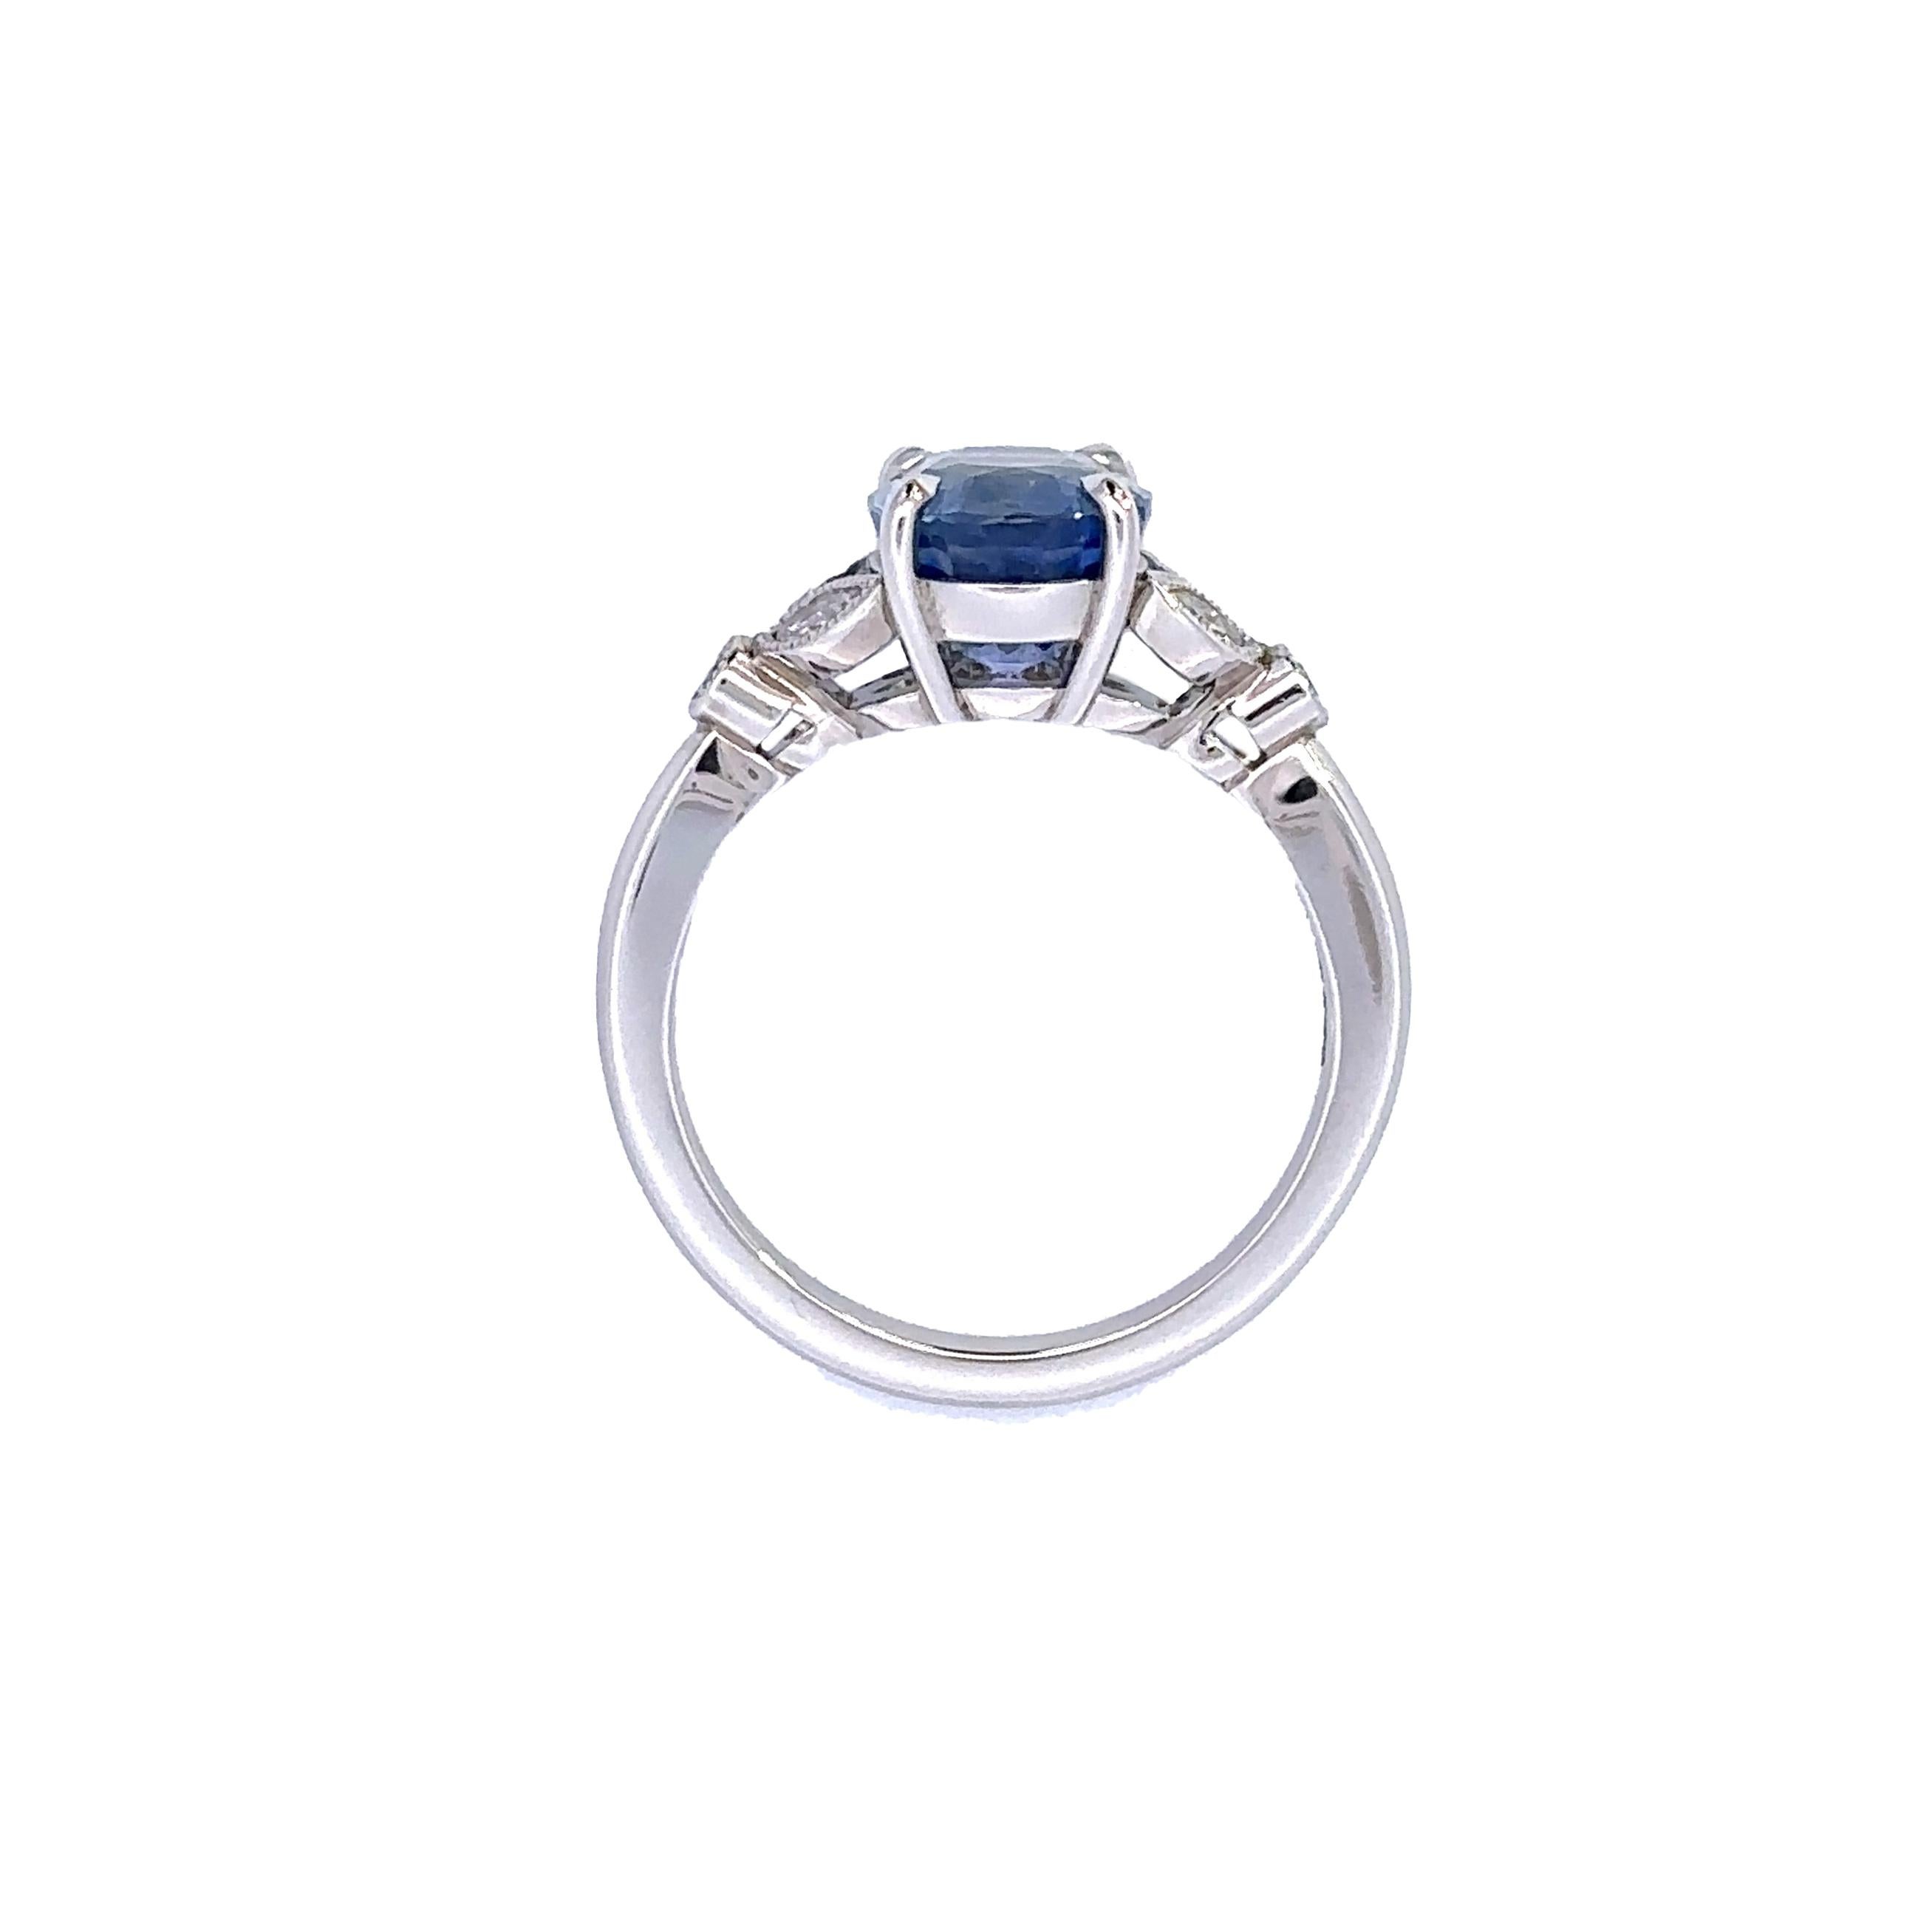 This ring features a stunning oval cornflower blue sapphire framed beautifully on either side by marquise cut diamonds and round brilliant cut diamonds forming a lovely petal detail. 

A soft blue cornflower blue colour that goes with everything,